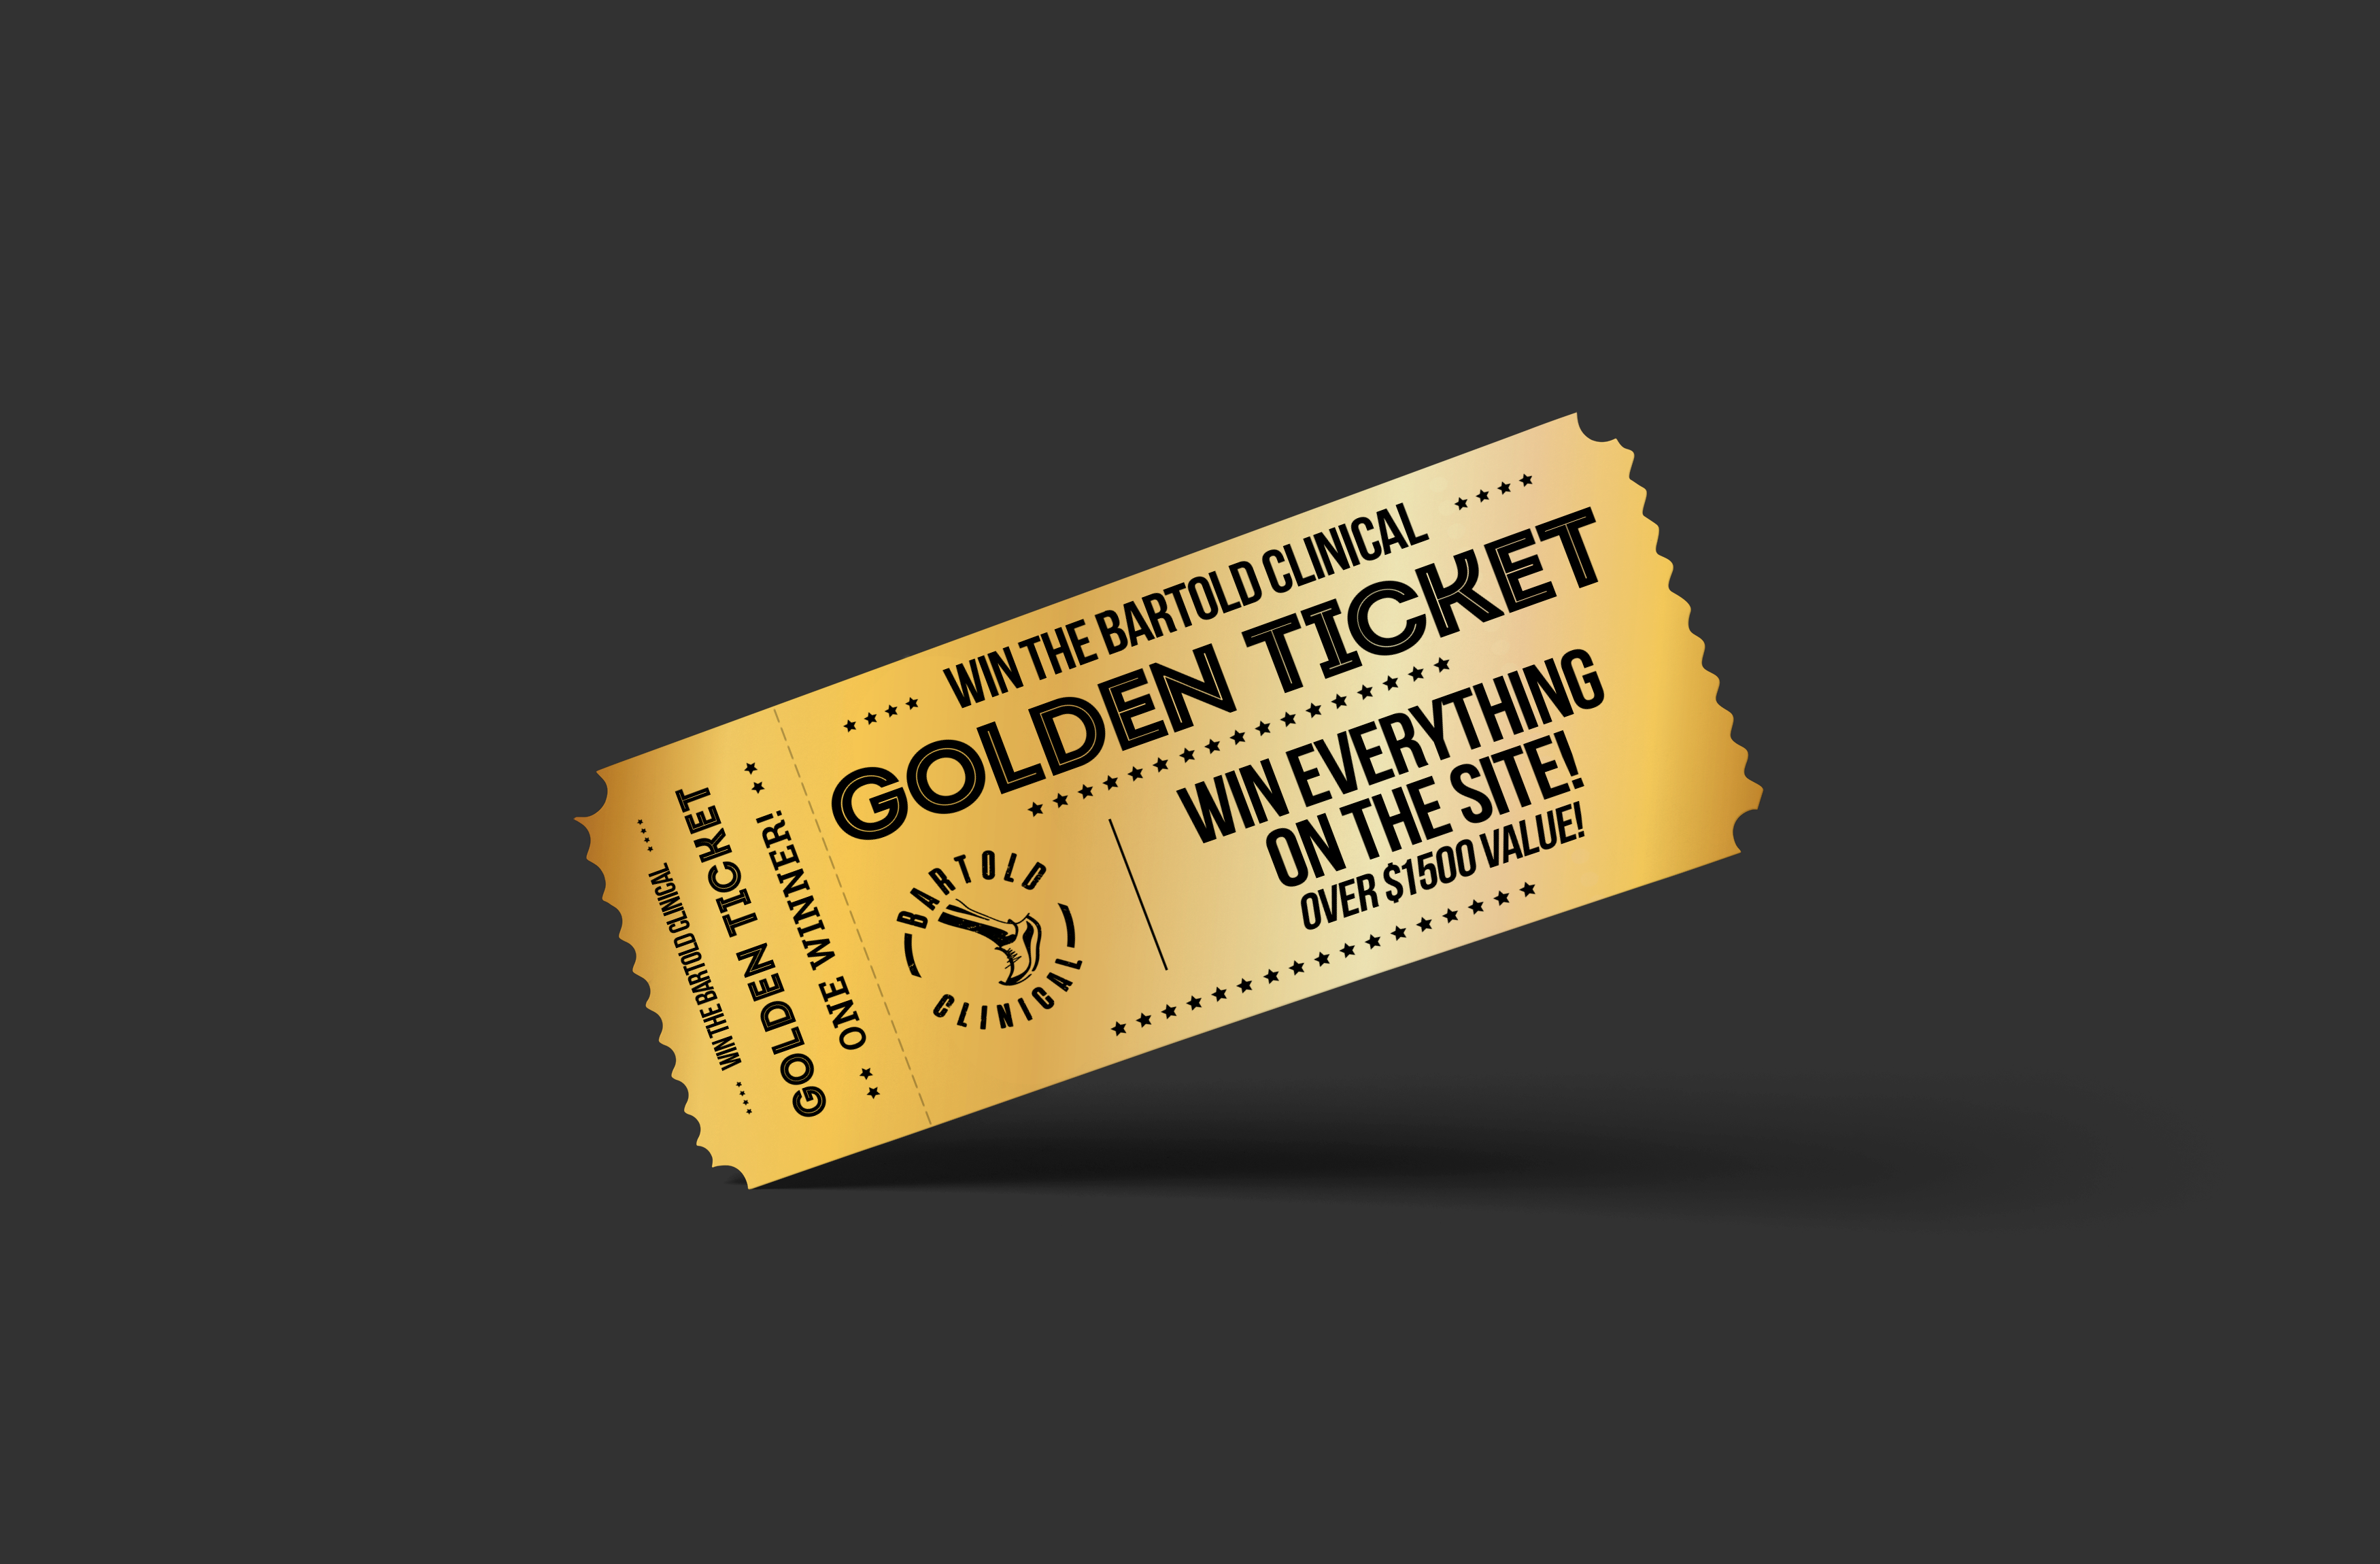 Bartold Clinical's Golden Ticket Giveaway